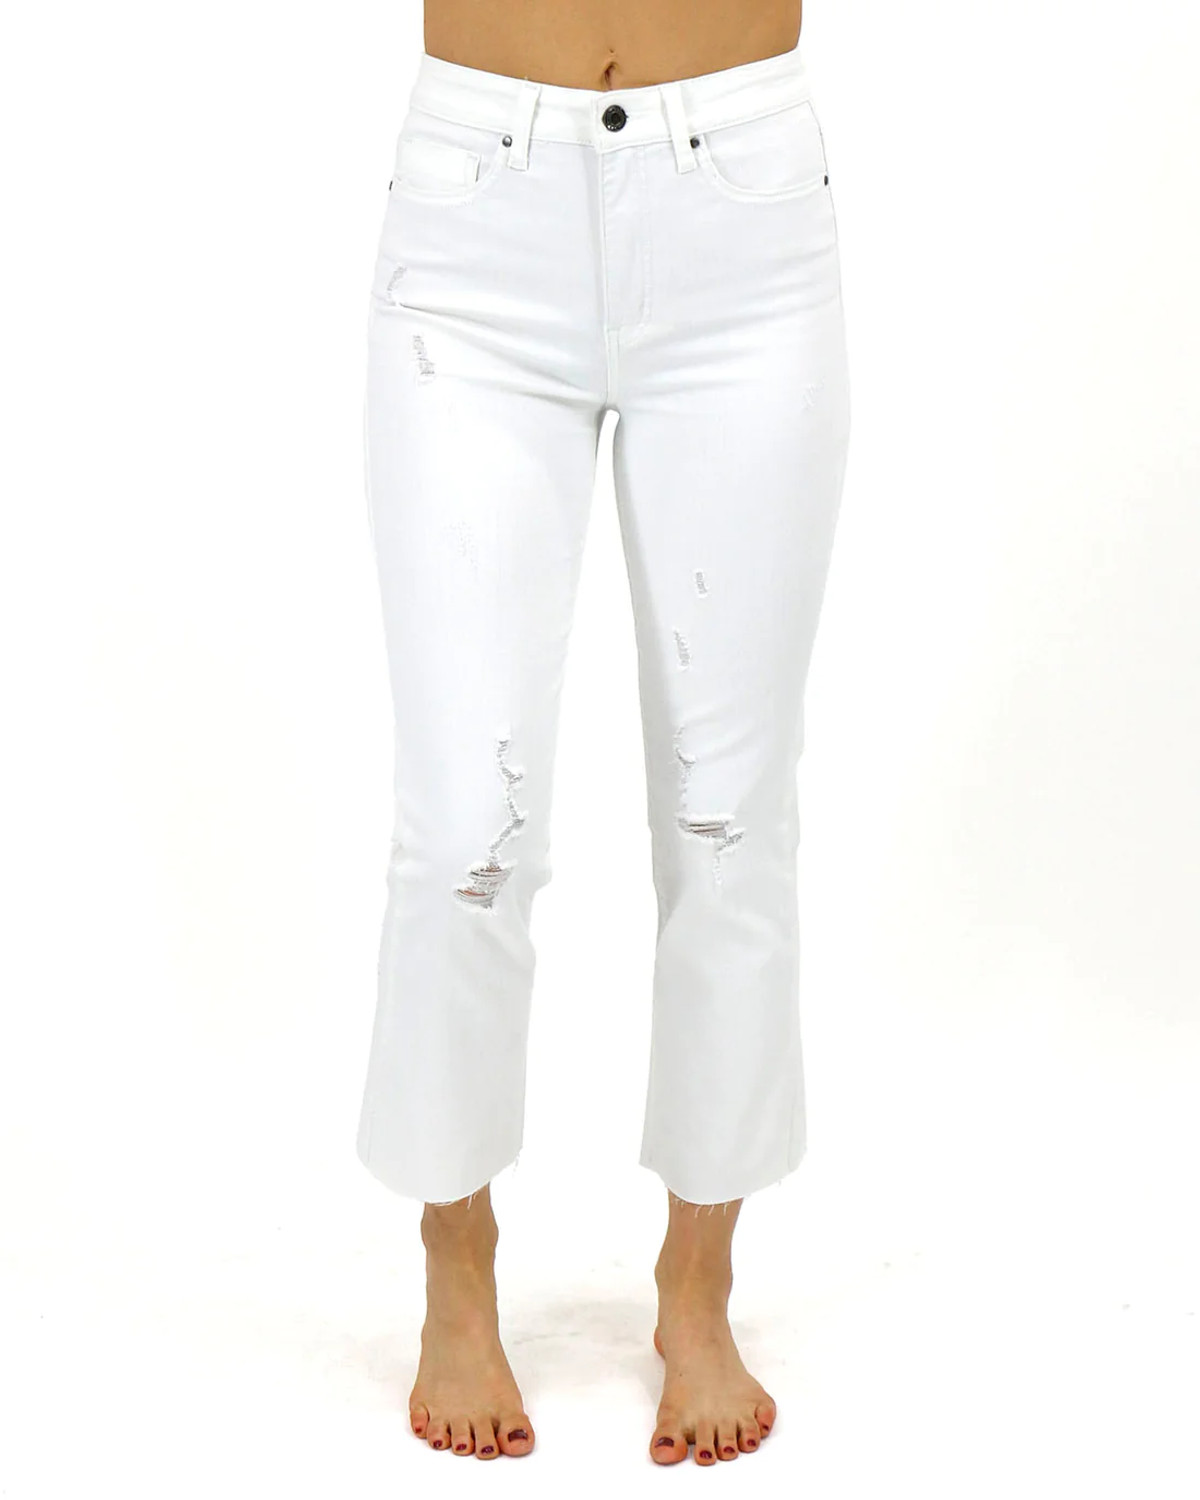 Grace and Lace- Mel's Fave Distressed Straight Leg Cropped Denim